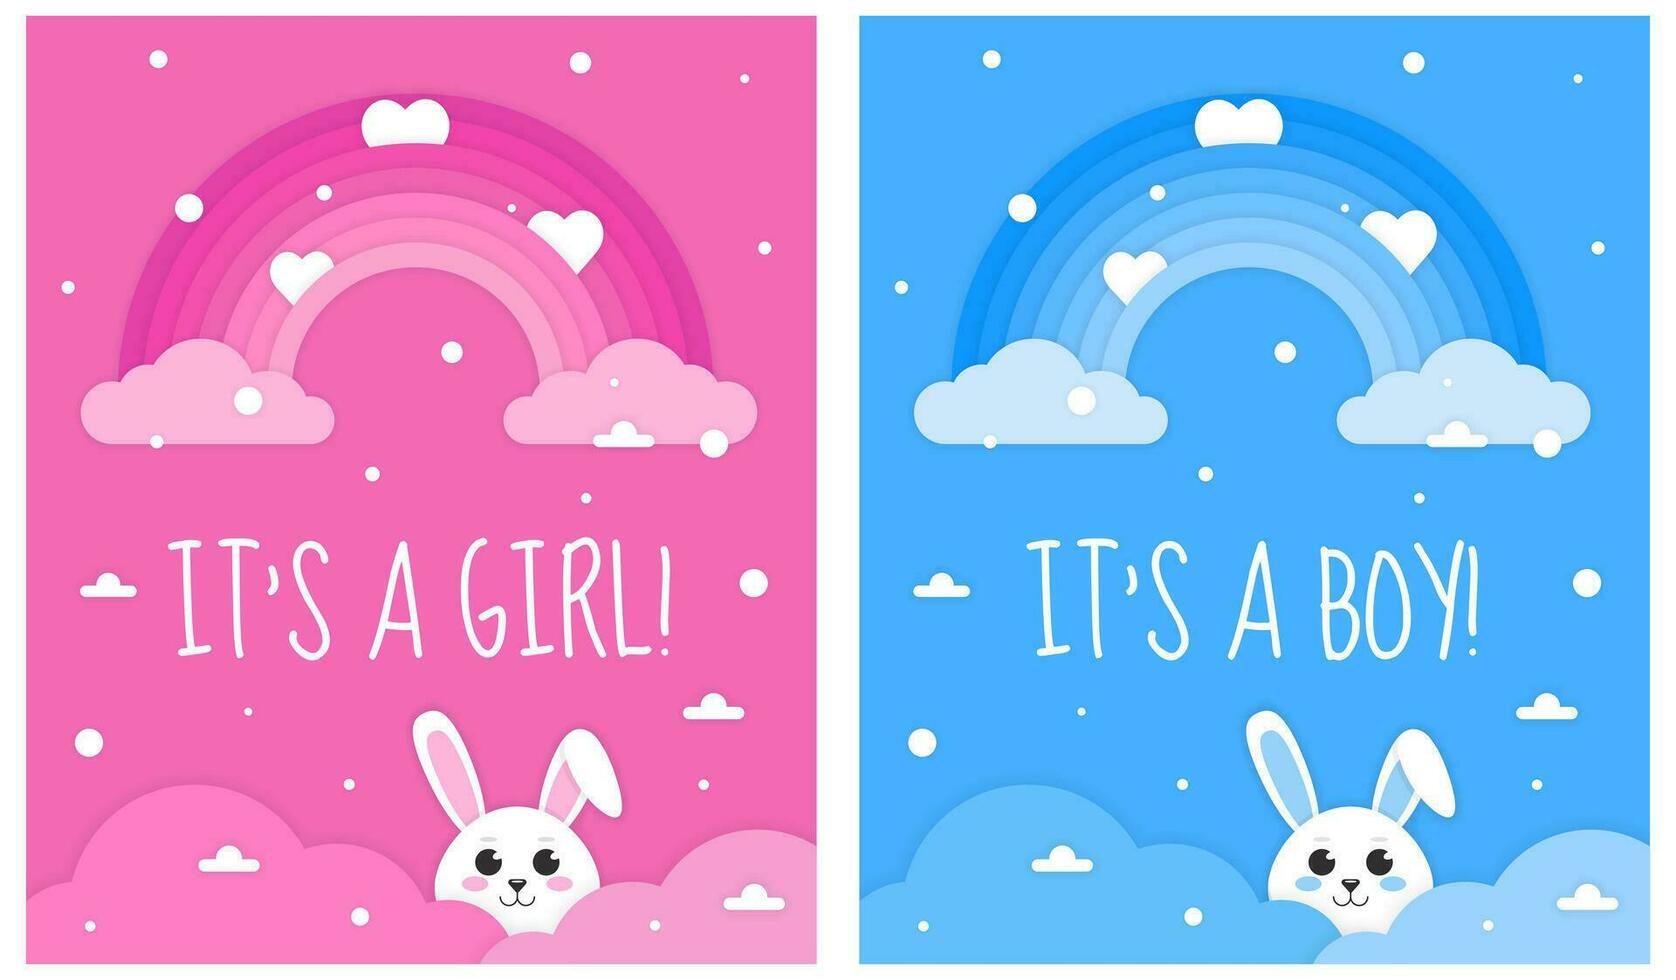 Its a girl, Its a boy card. Set of invitation card for baby new born celebration with cartoon rabbit, clouds and rainbow. Paper cut style. Pink and blue background. Vector illustration